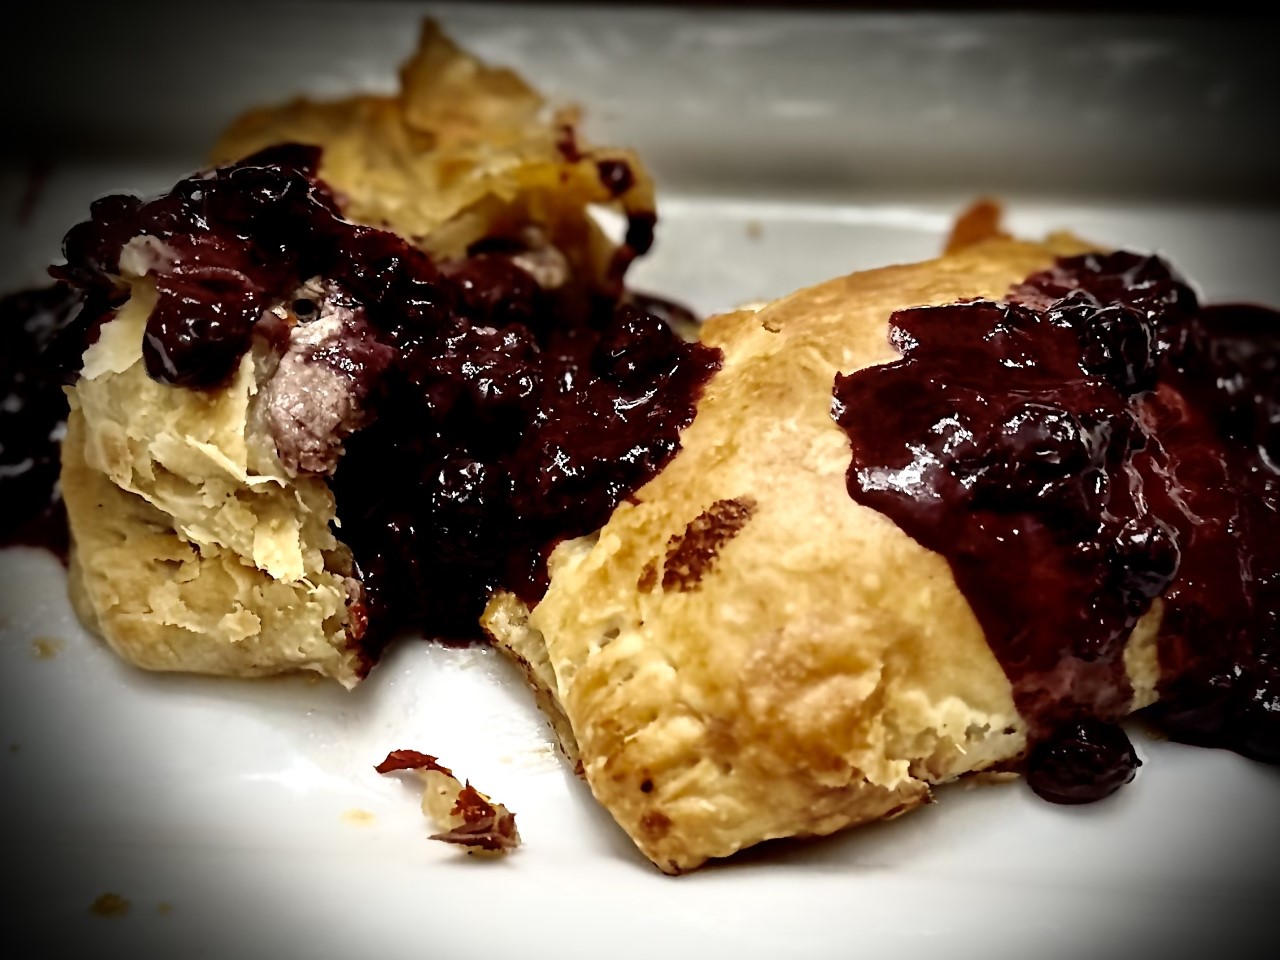 Filet Mignon Pastry Pockets with Herbed Mascarpone and Savory Blueberry Sauce